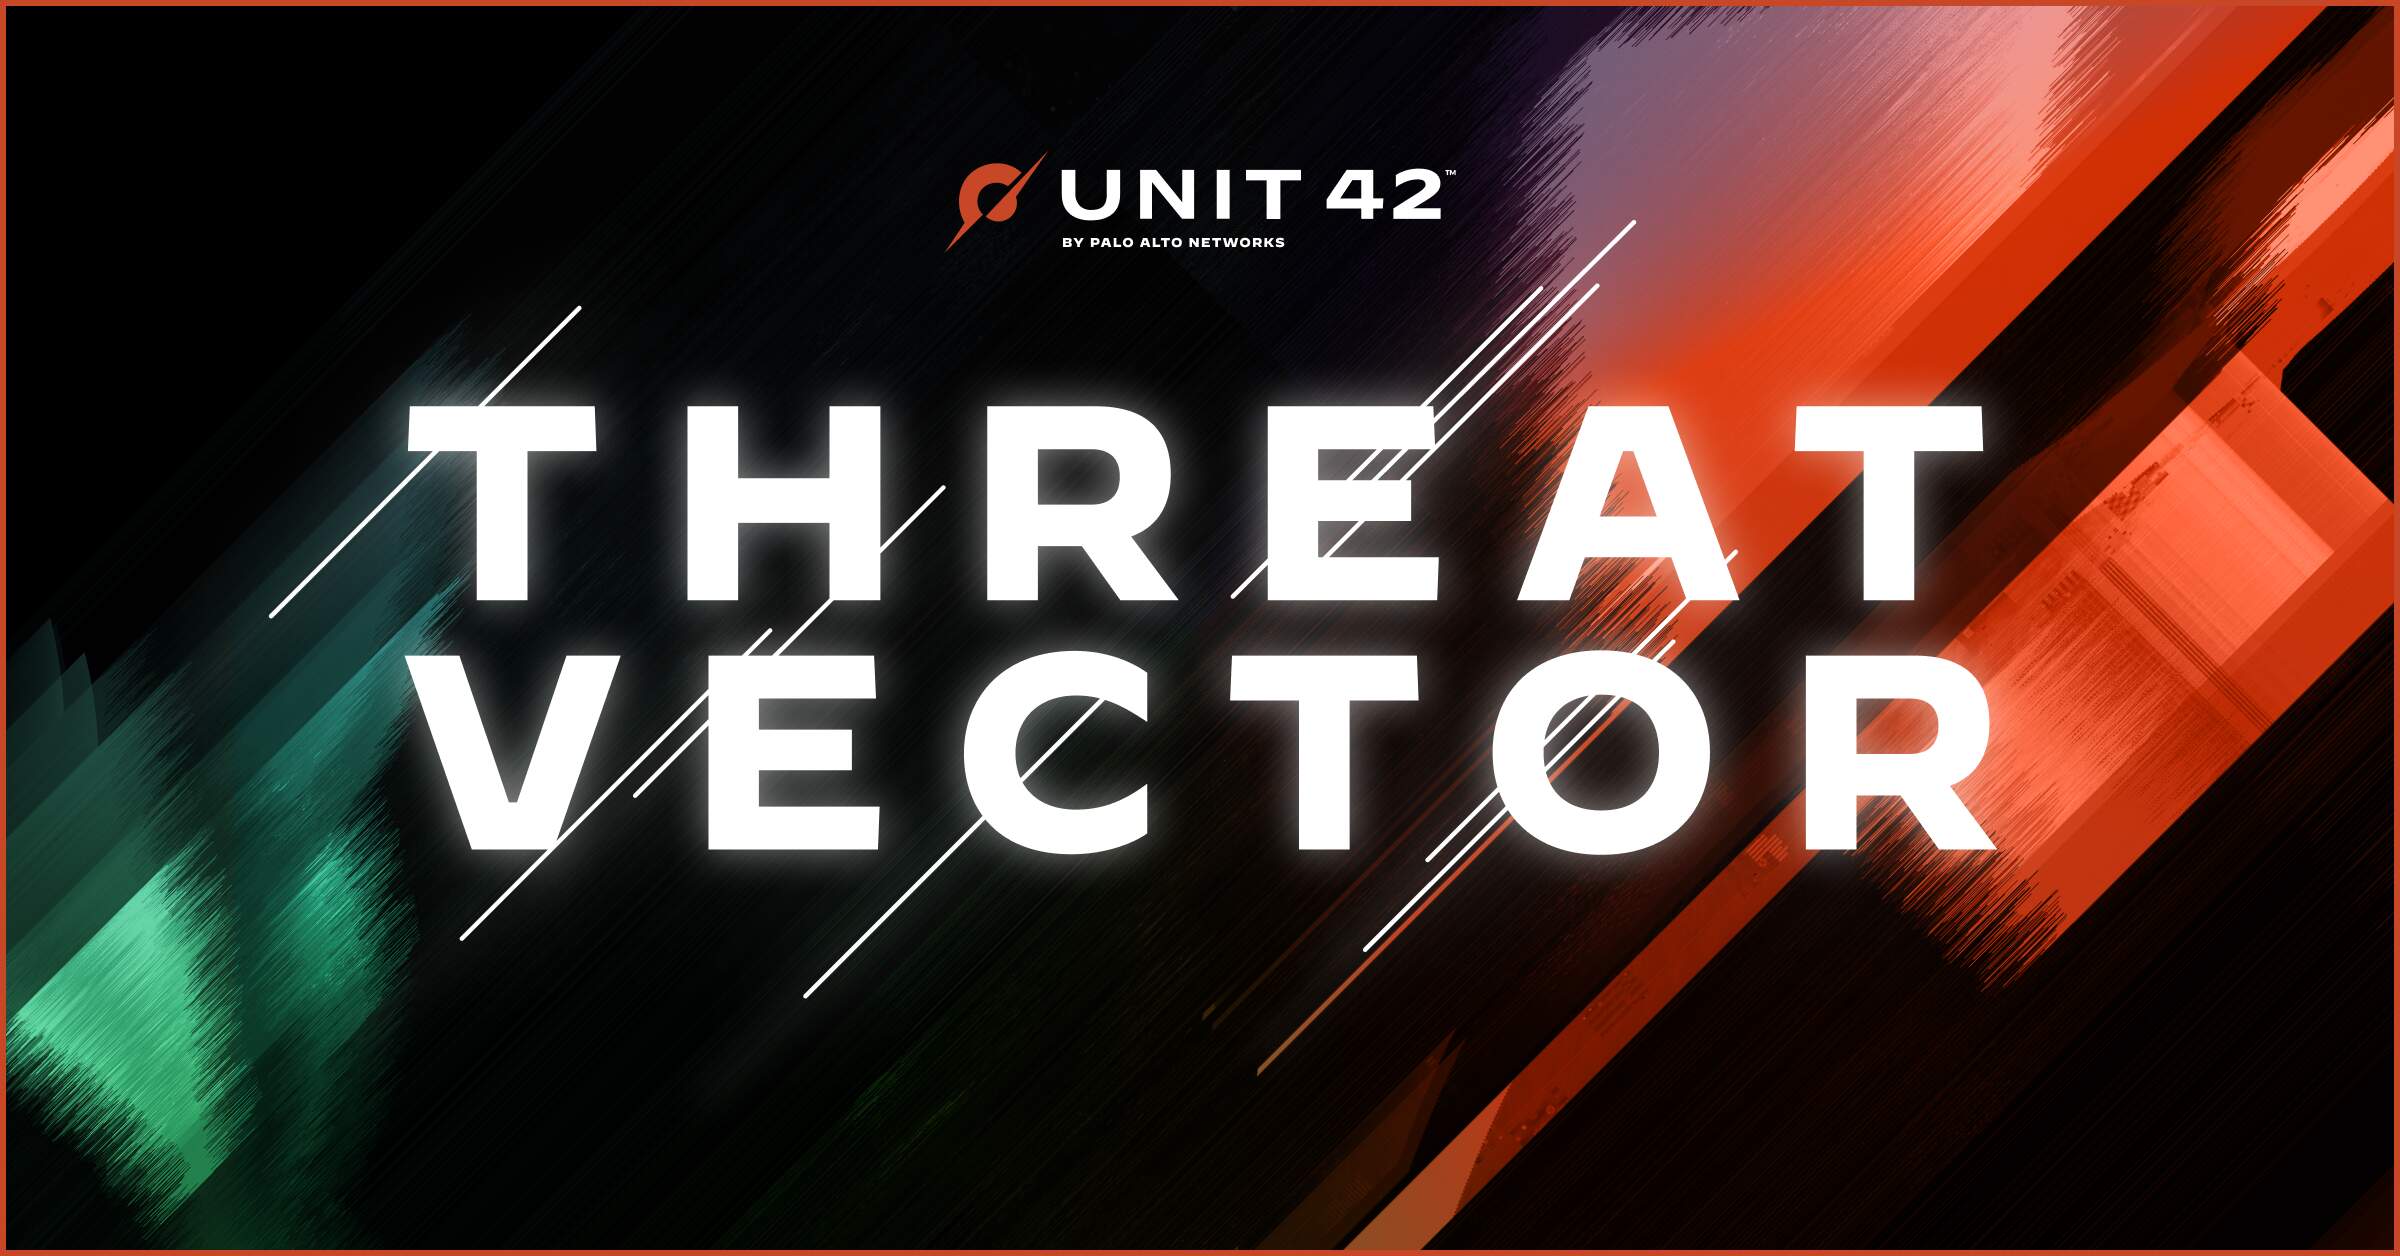 N2K Cyber and Unit 42 by Palo Alto Networks collaborate to launch Unit 42 Threat Vector, the newest segment on The CyberWire Daily Podcast